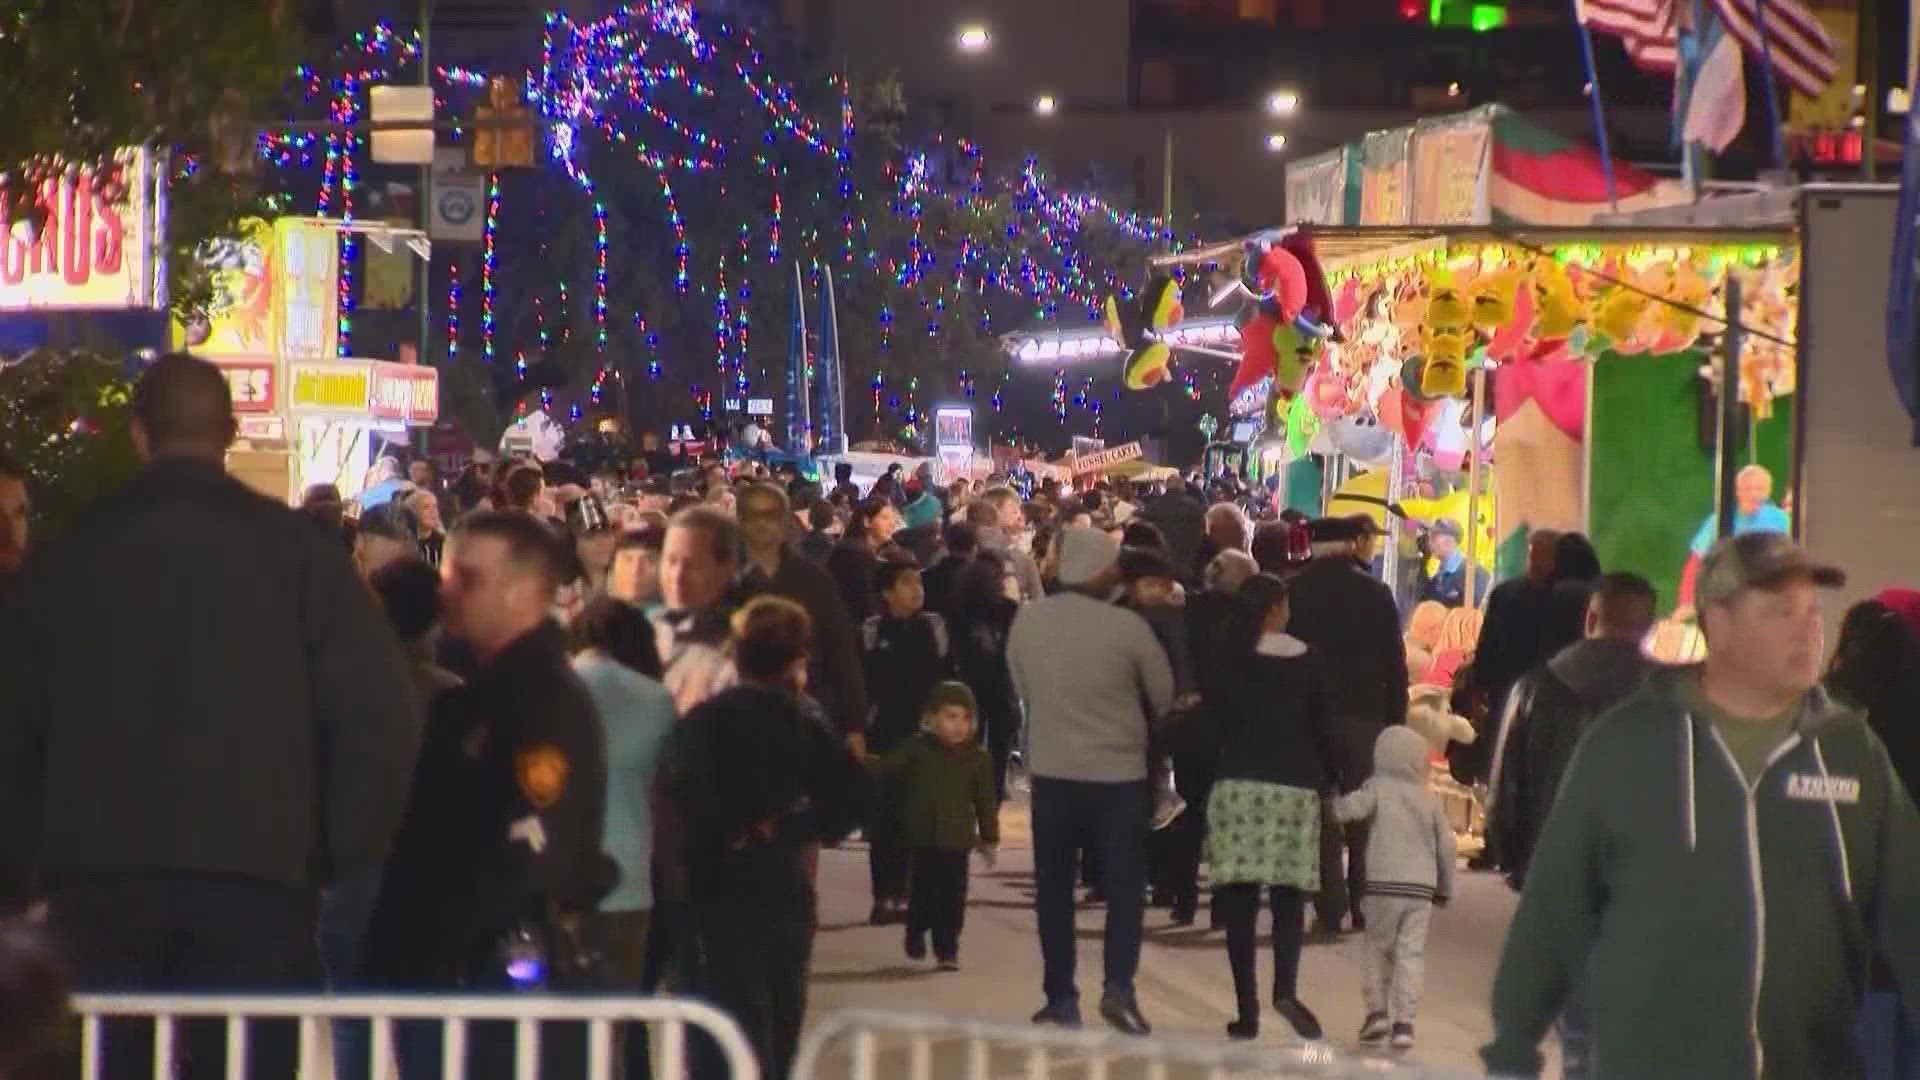 Here's what to expect if you plan on celebrating New Year's here in San Antonio.